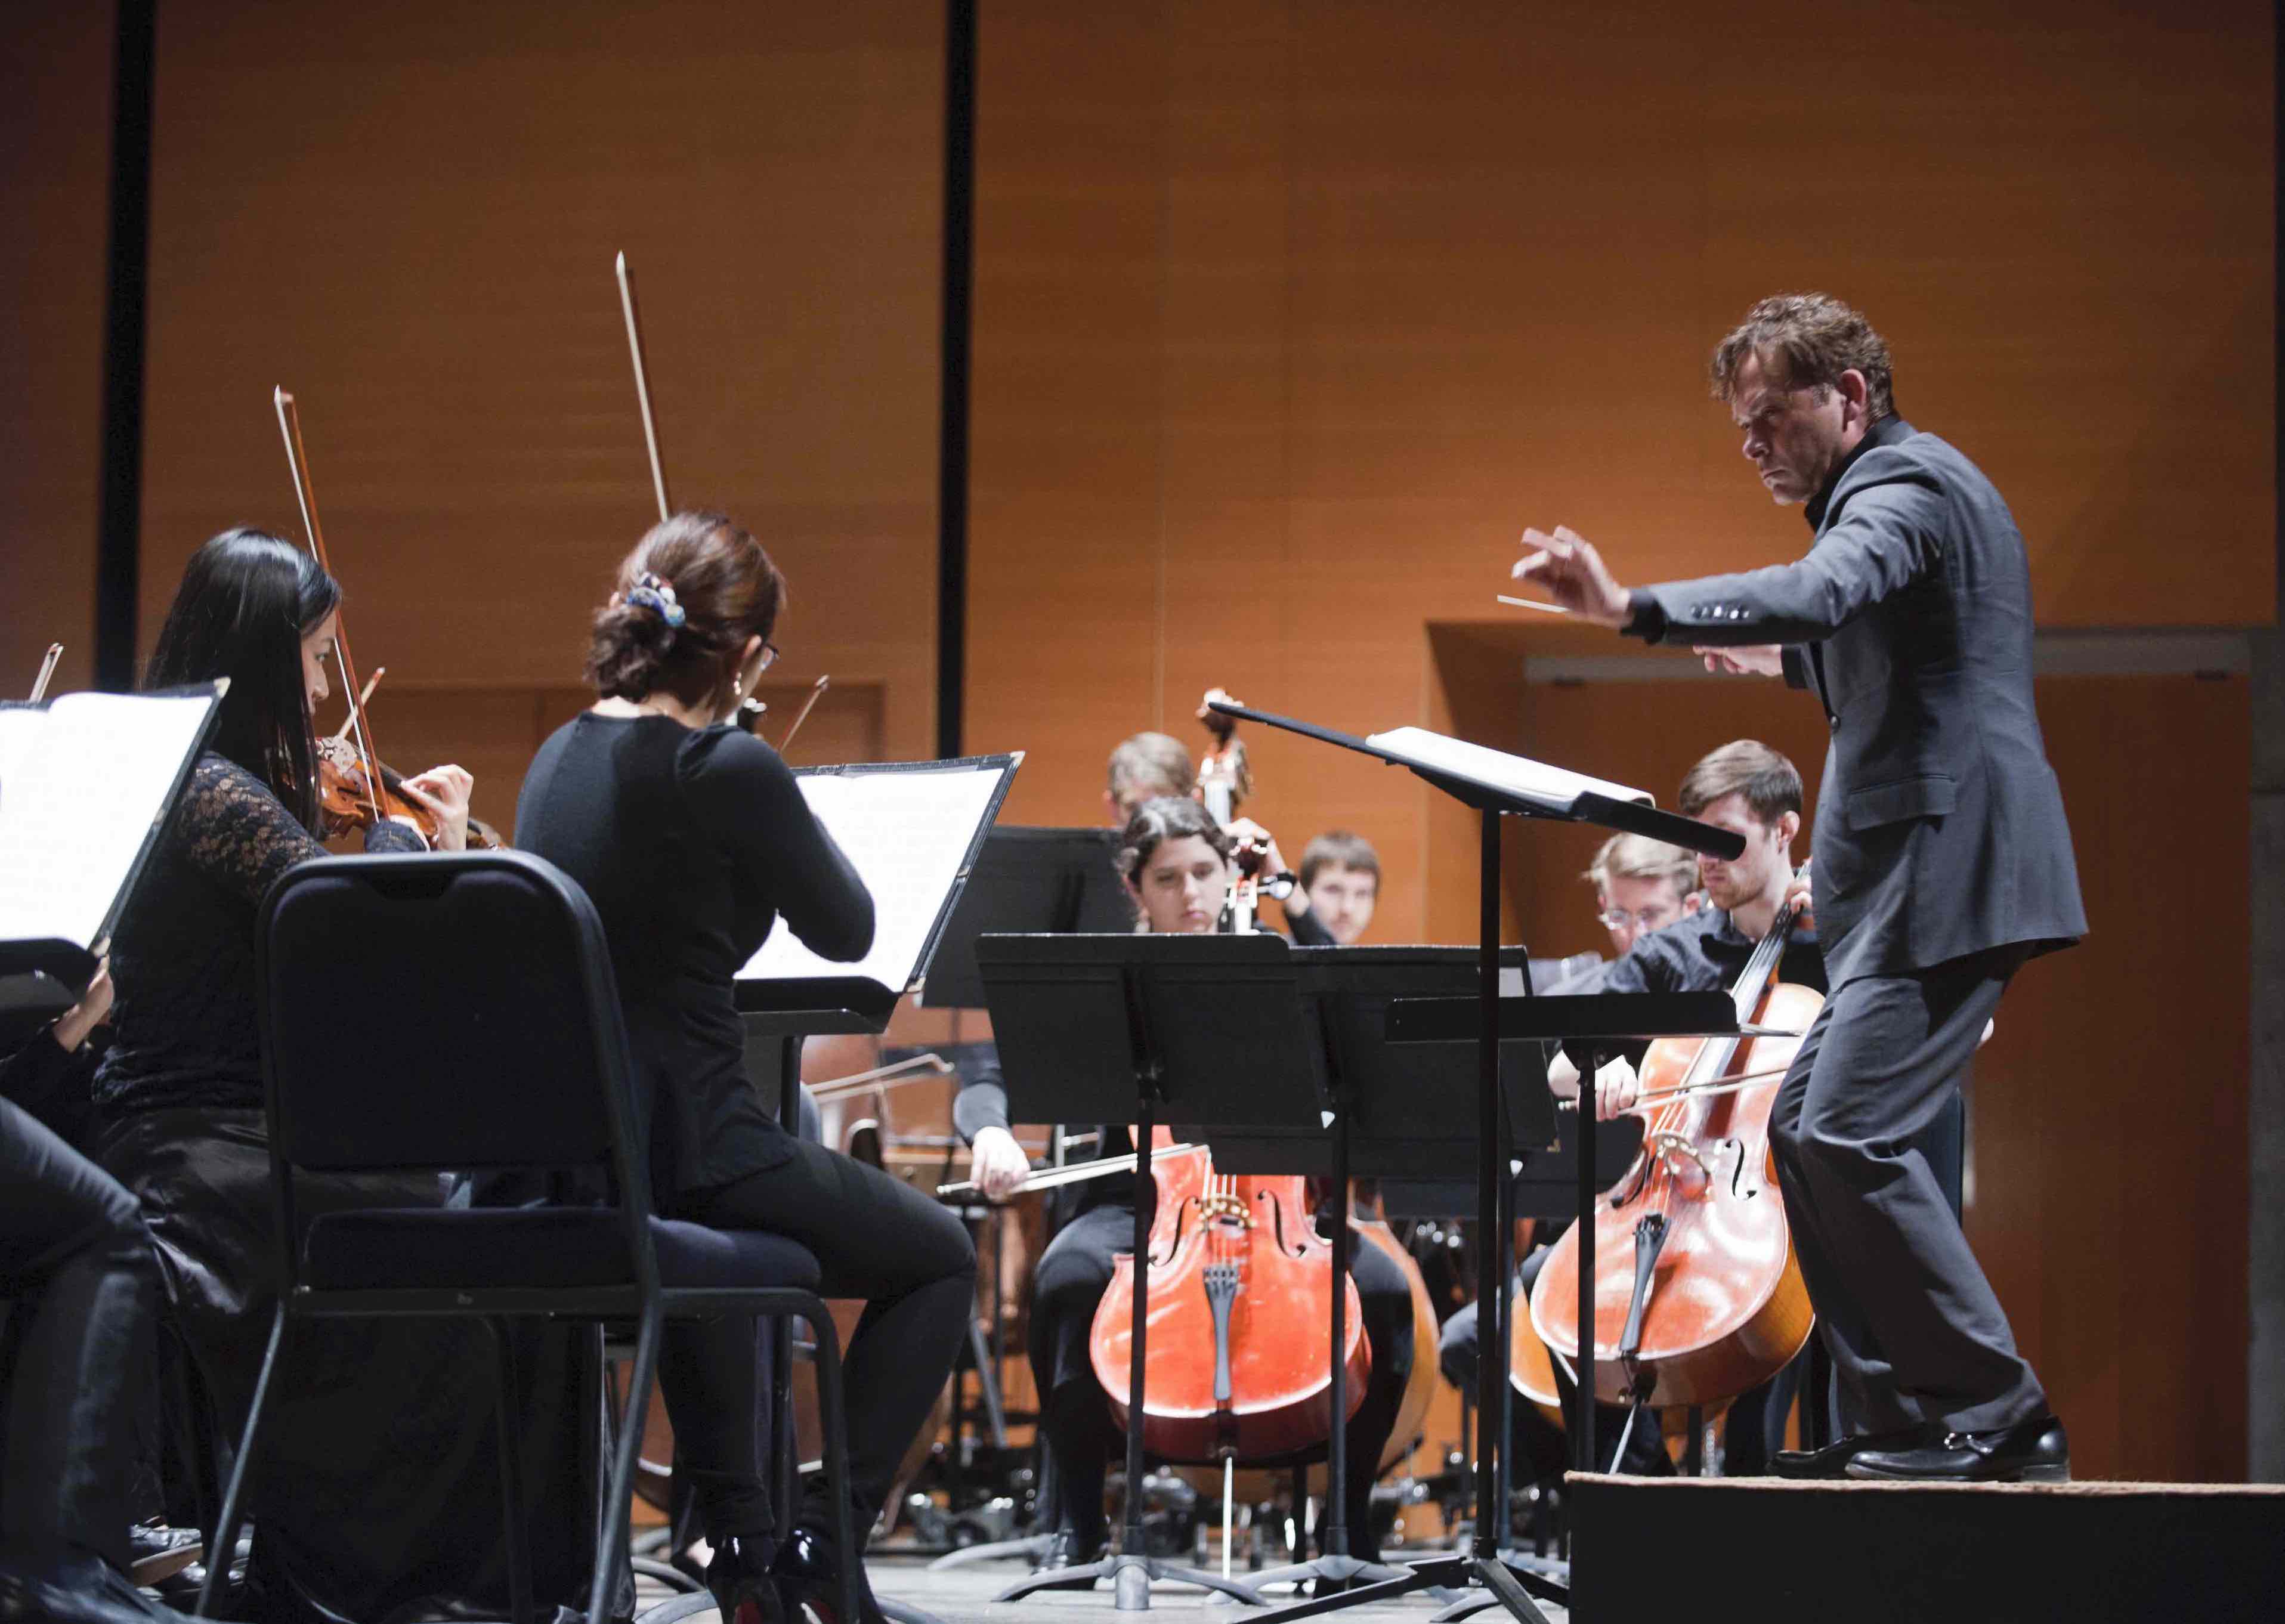 The Bard College Conservatory of Music Presents the Conservatory Orchestra